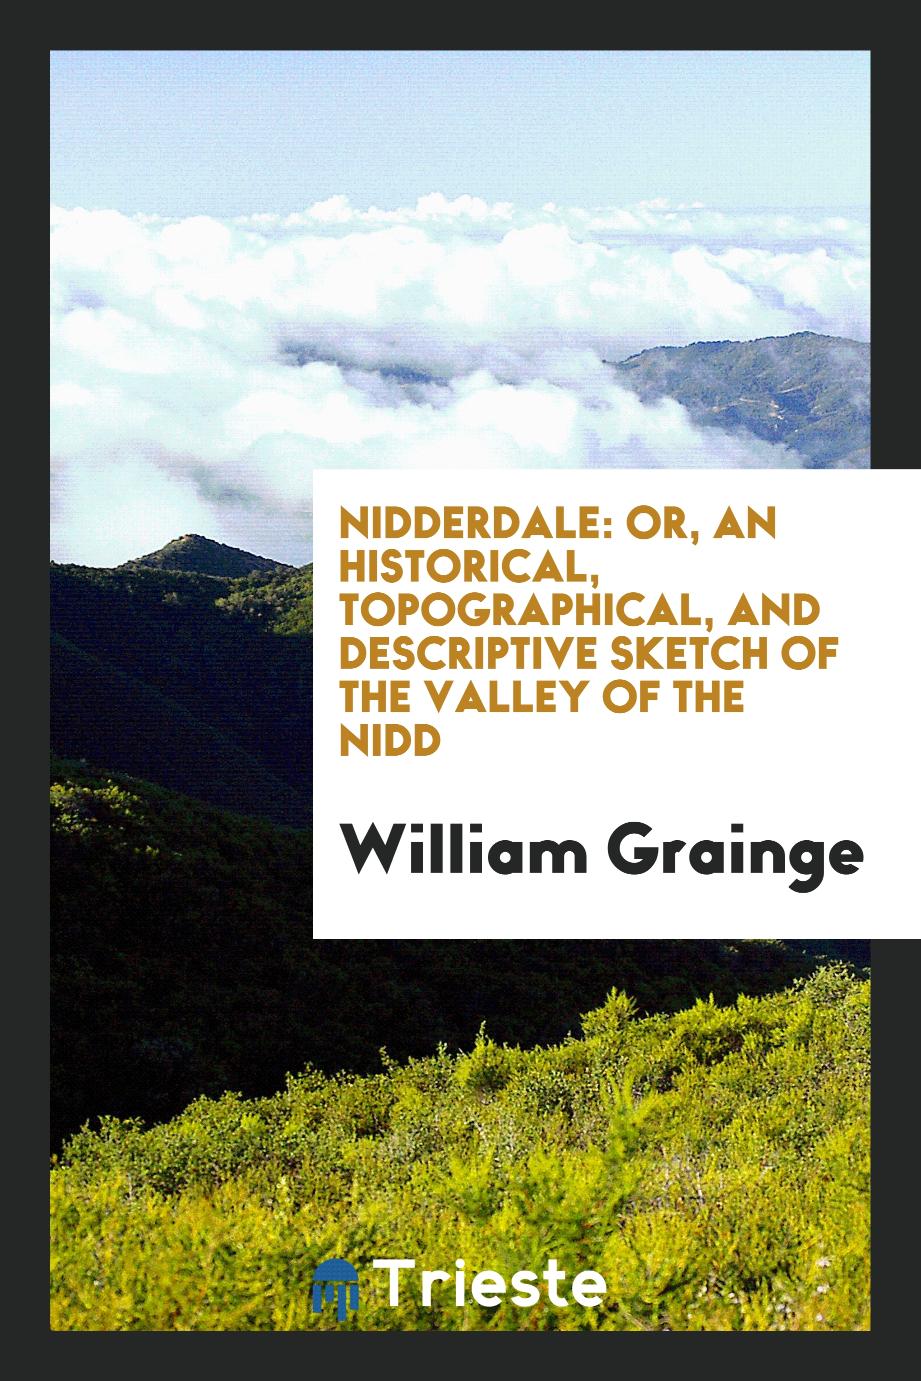 Nidderdale: Or, an Historical, Topographical, and Descriptive Sketch of the Valley of the Nidd